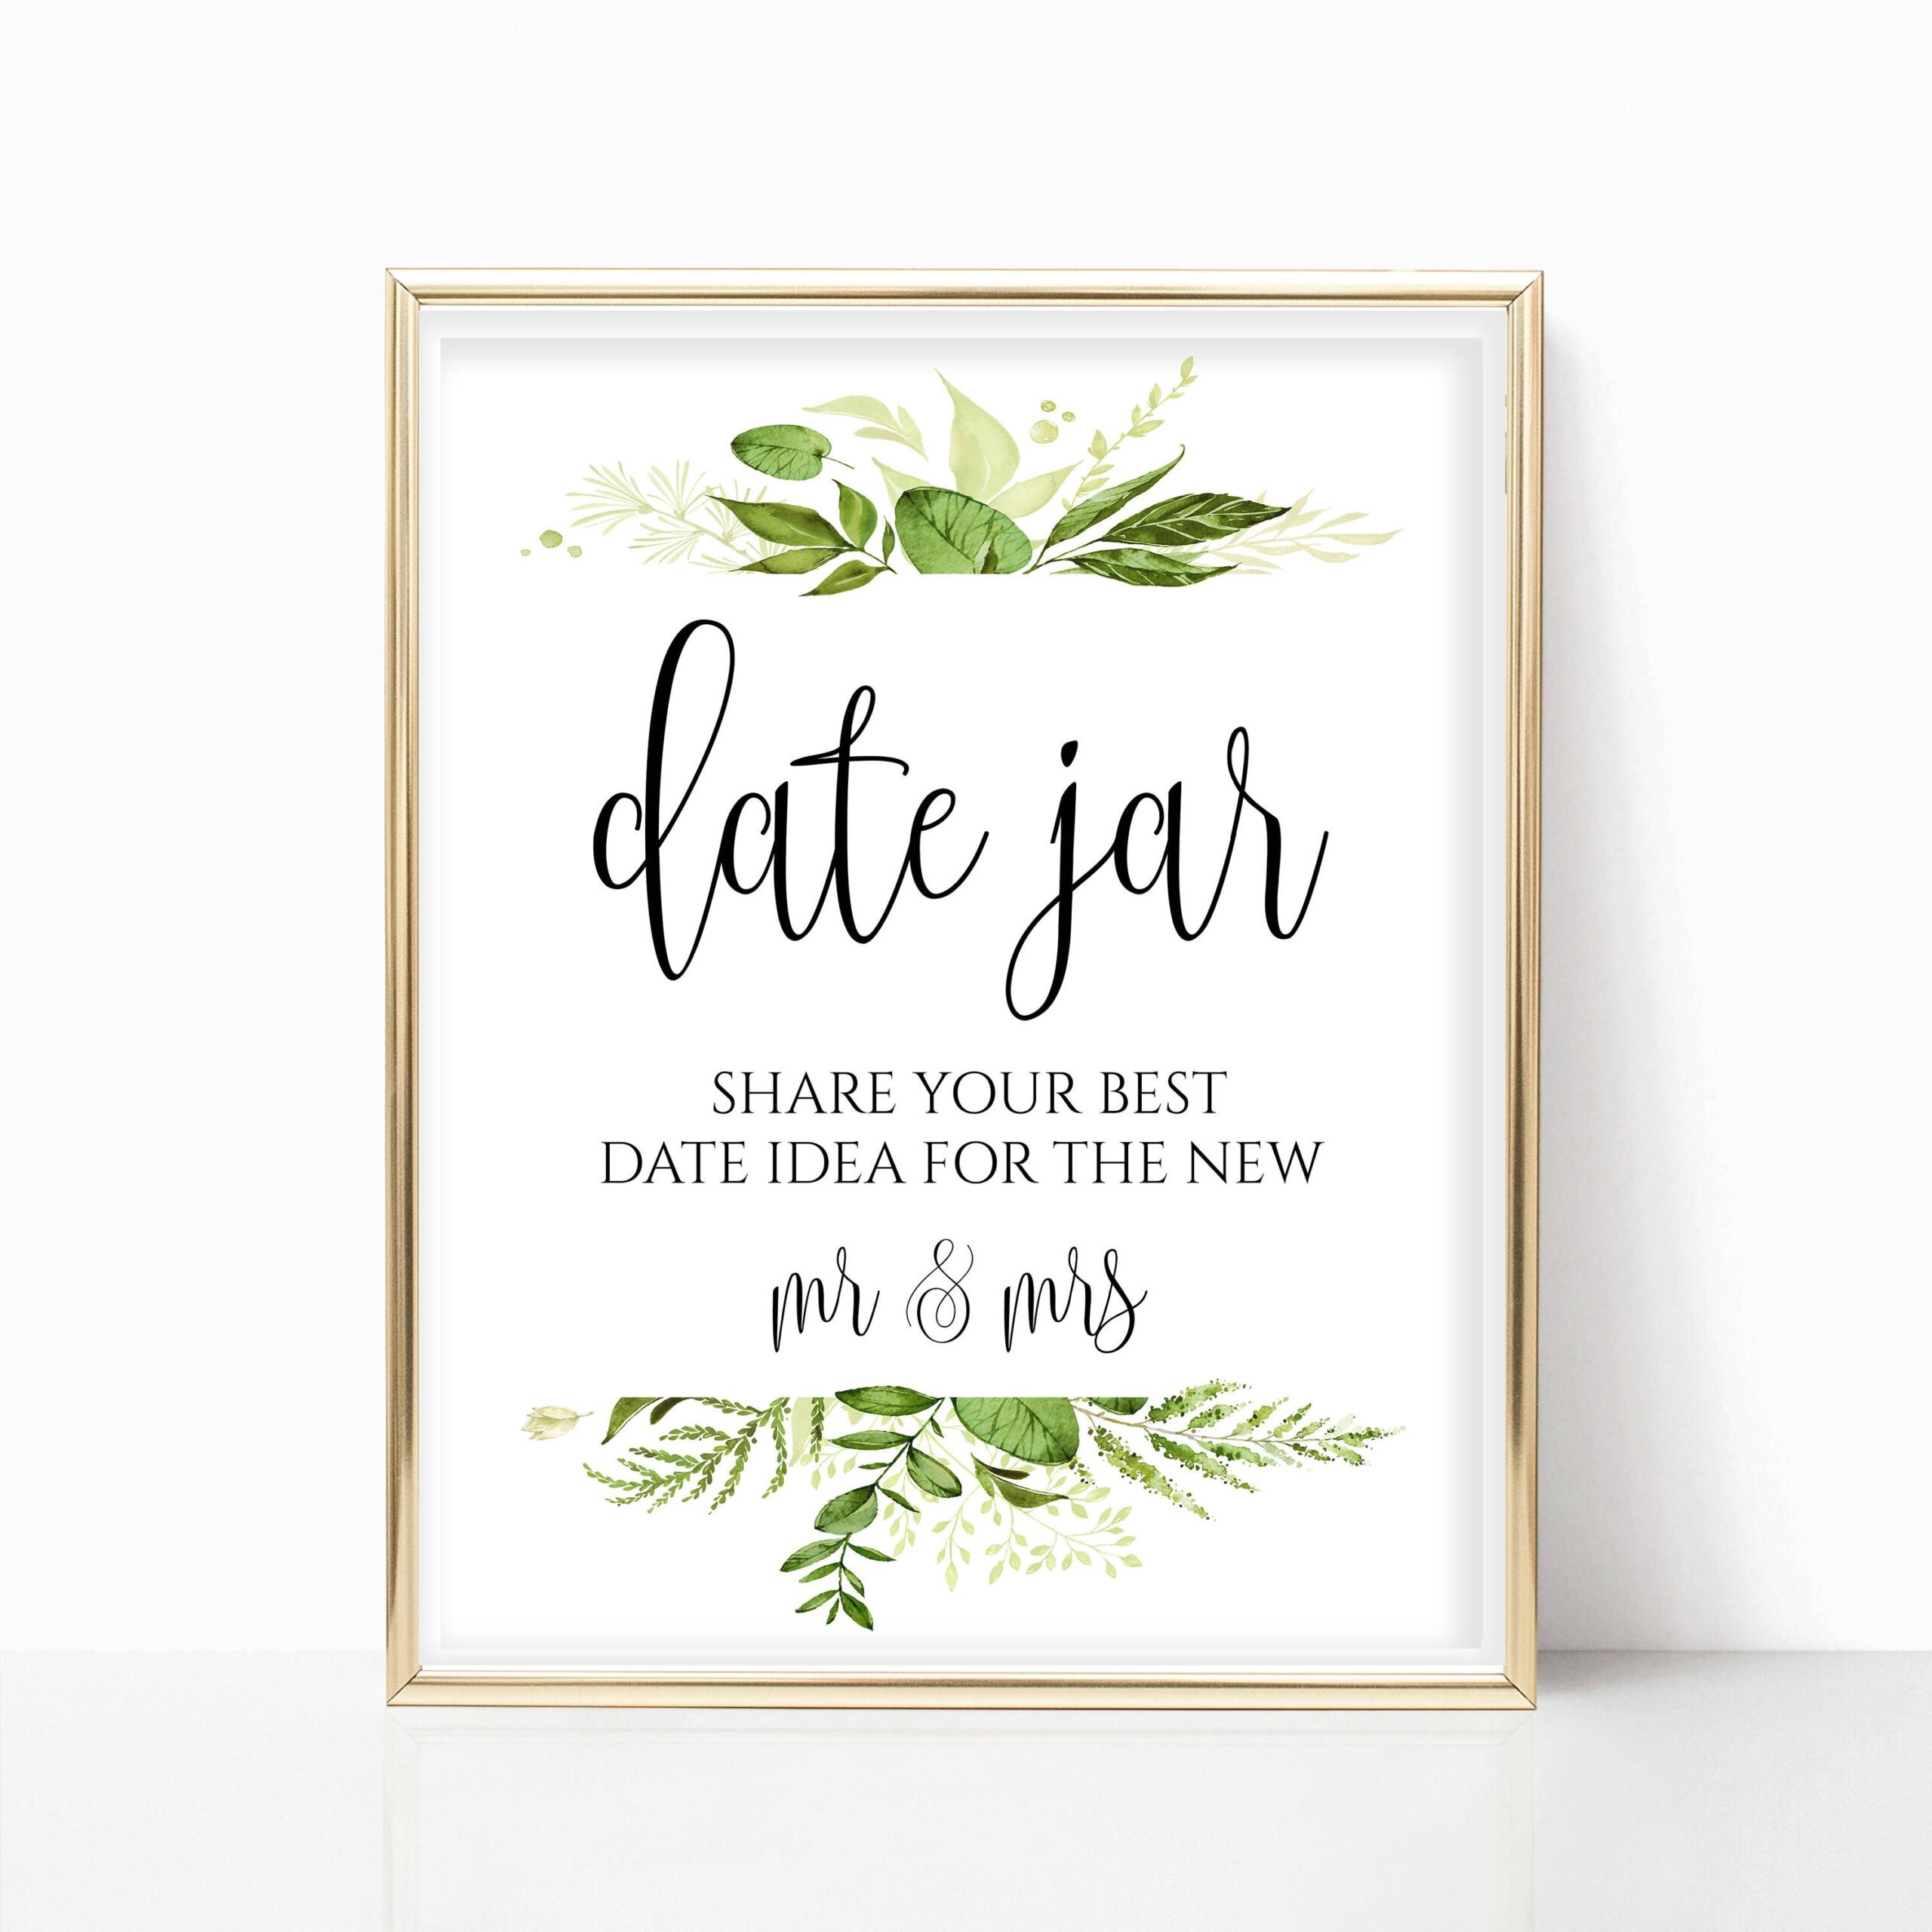 Printable Date Jar Sign Date Night Jar Date Night Sign Date Night Ideas Date Ideas Wedding Sign Instant Download 8x10 5x7 4x6 Greenery Etsy